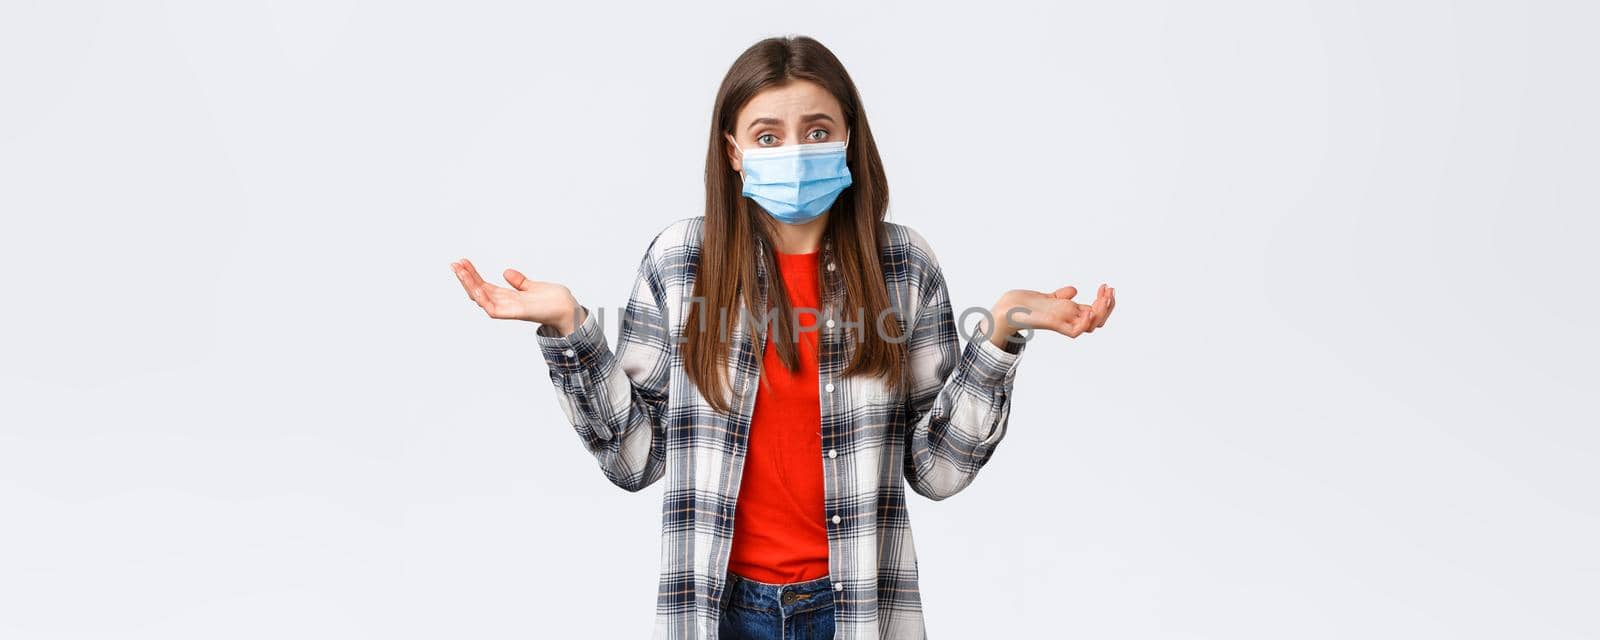 Coronavirus outbreak, leisure on quarantine, social distancing and emotions concept. Confused and indecisive young woman in medical mask dont know what do, shrugging with hands spread sideways.